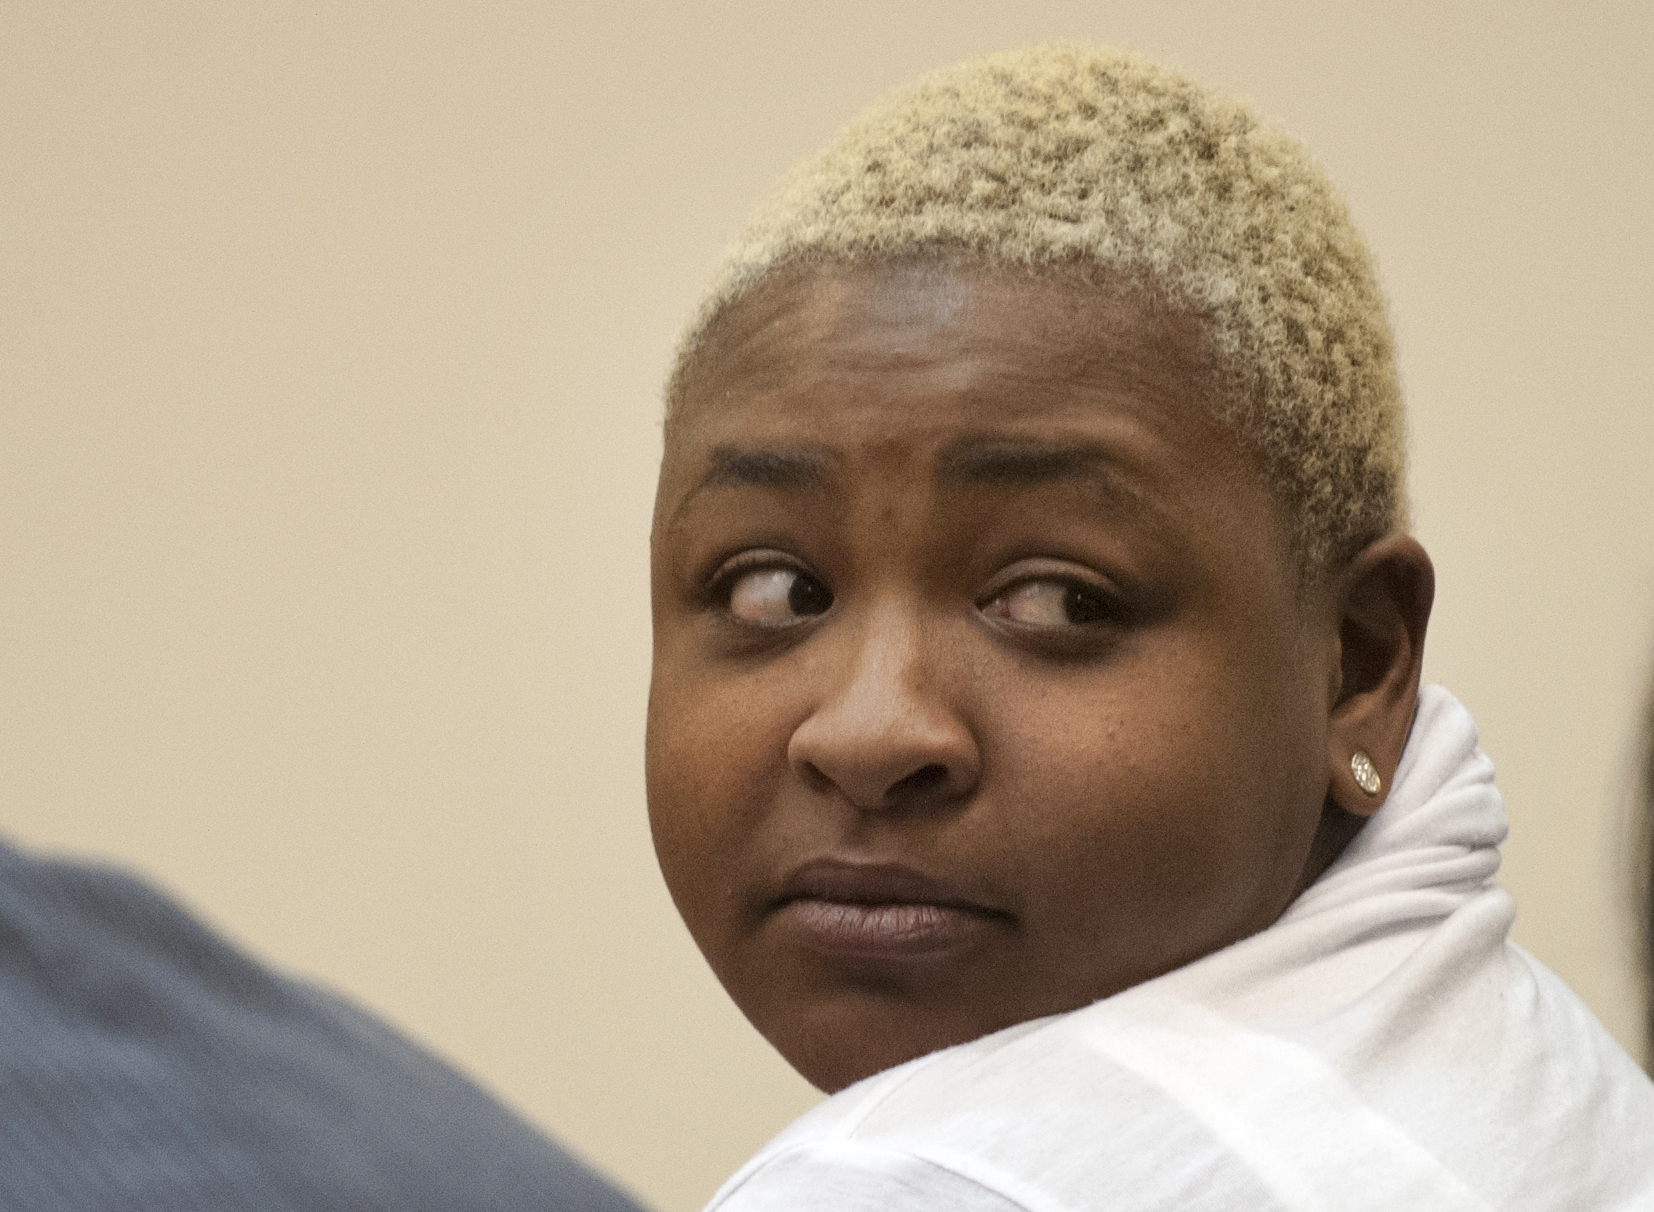 Shaneka Monique Torres looks around the courtroom before being found guilty on all charges related to her shooting a gun into a McDonald's when she failed to get bacon on her burger, Wednesday, March 25, 2015, in Grand Rapids, Mich (Chris Clark—AP)